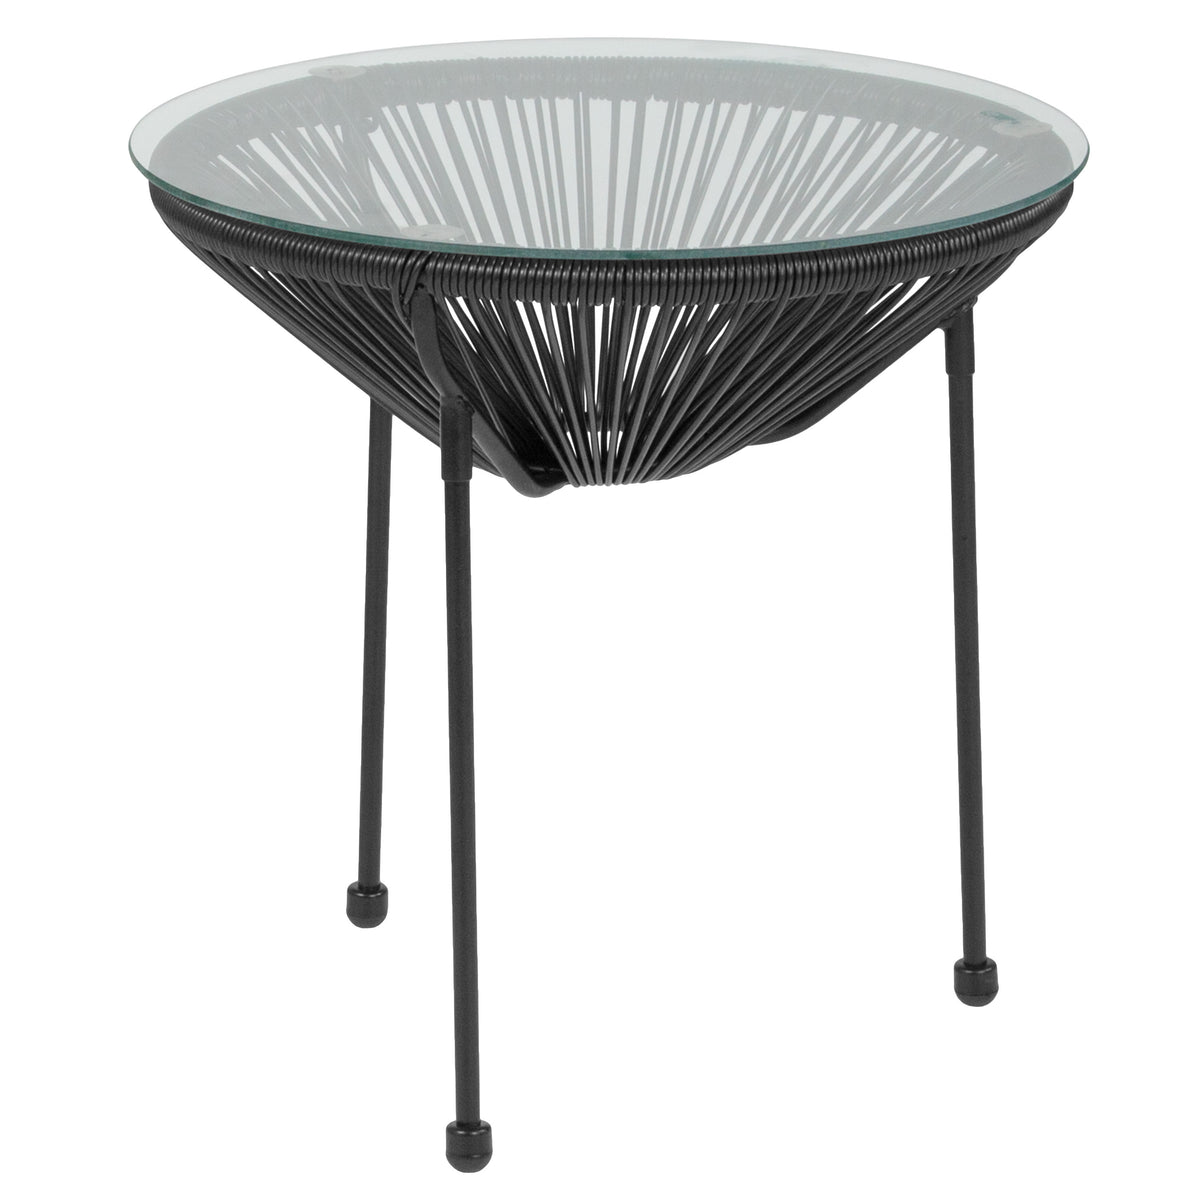 Black |#| Black Rattan Bungee Table with Glass Top - Living Room Furniture